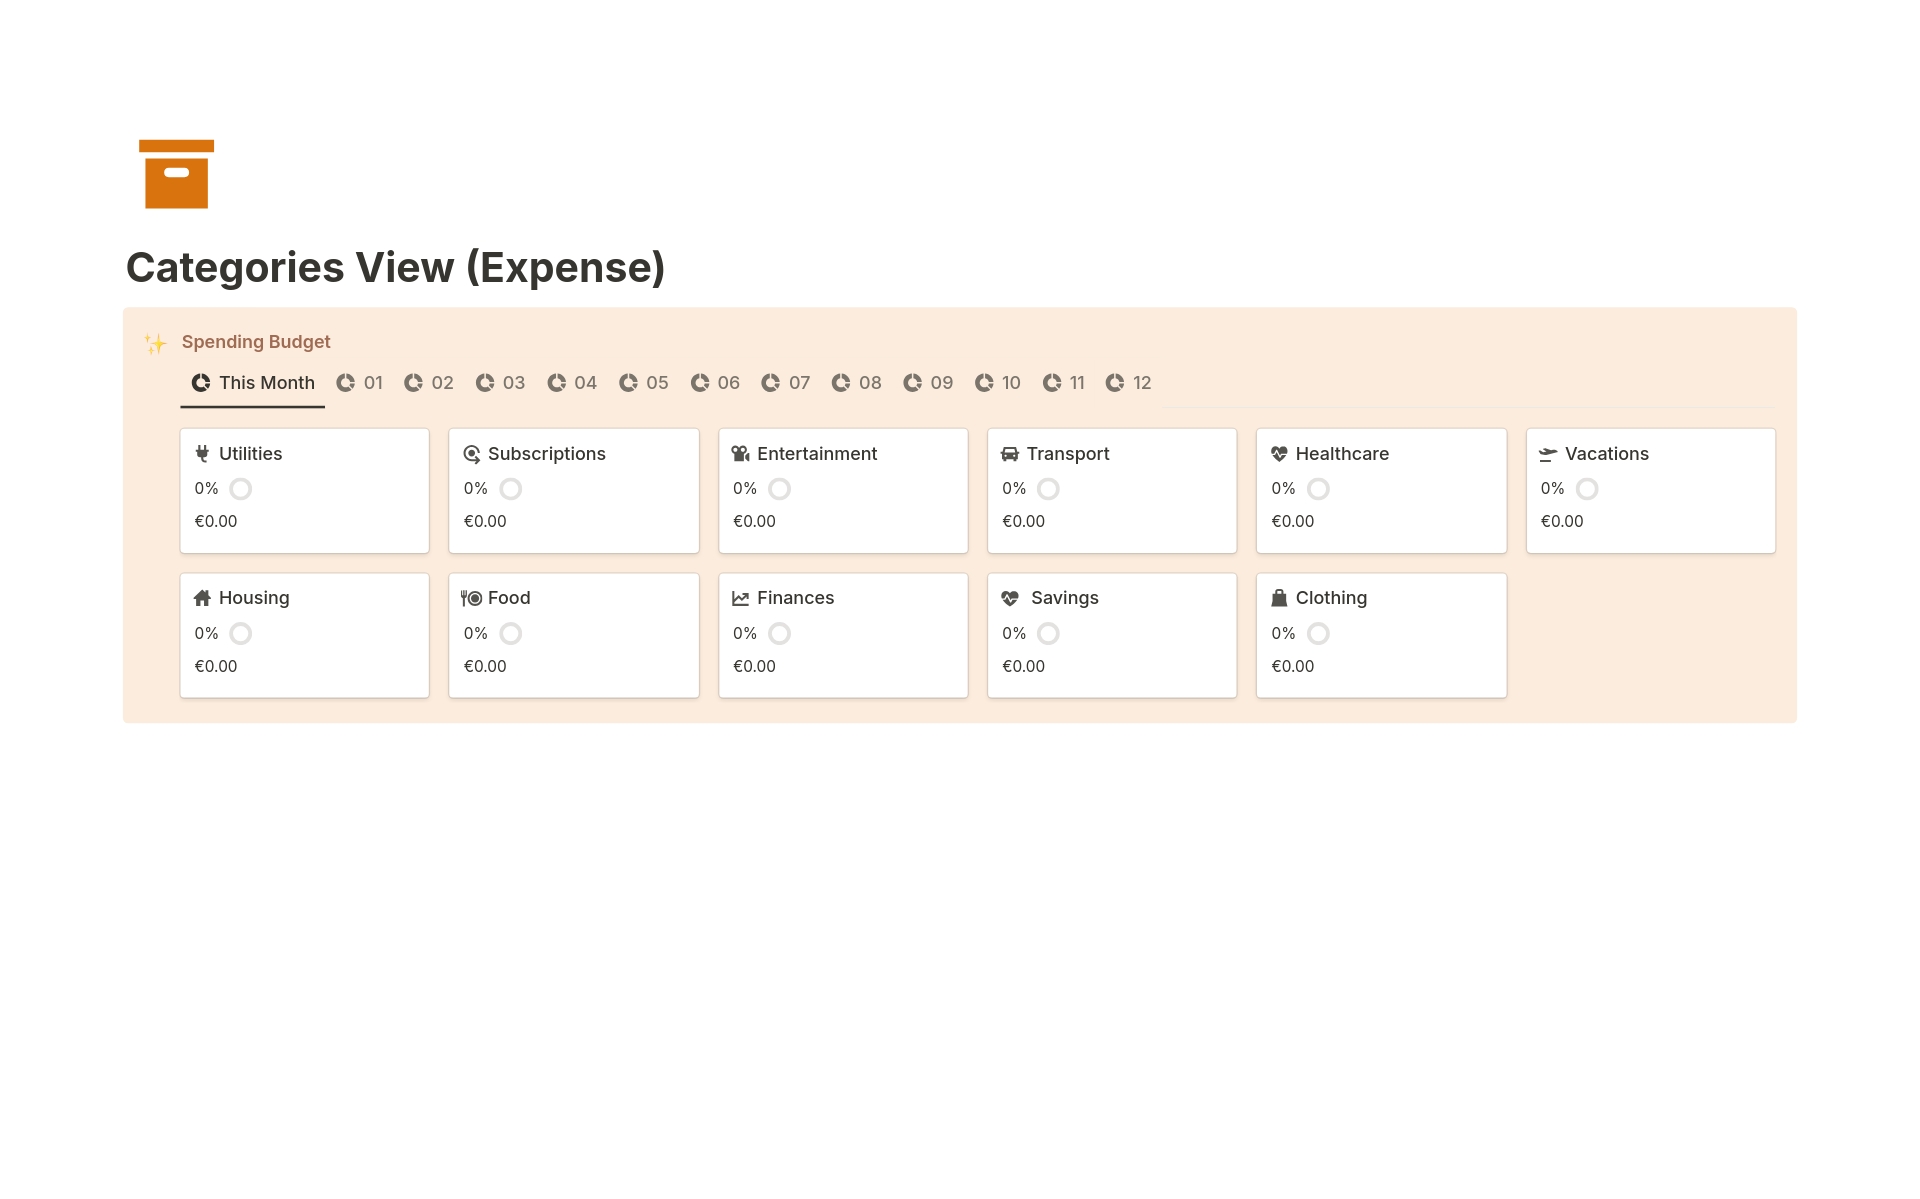 This template can help you track your expenses and income. 